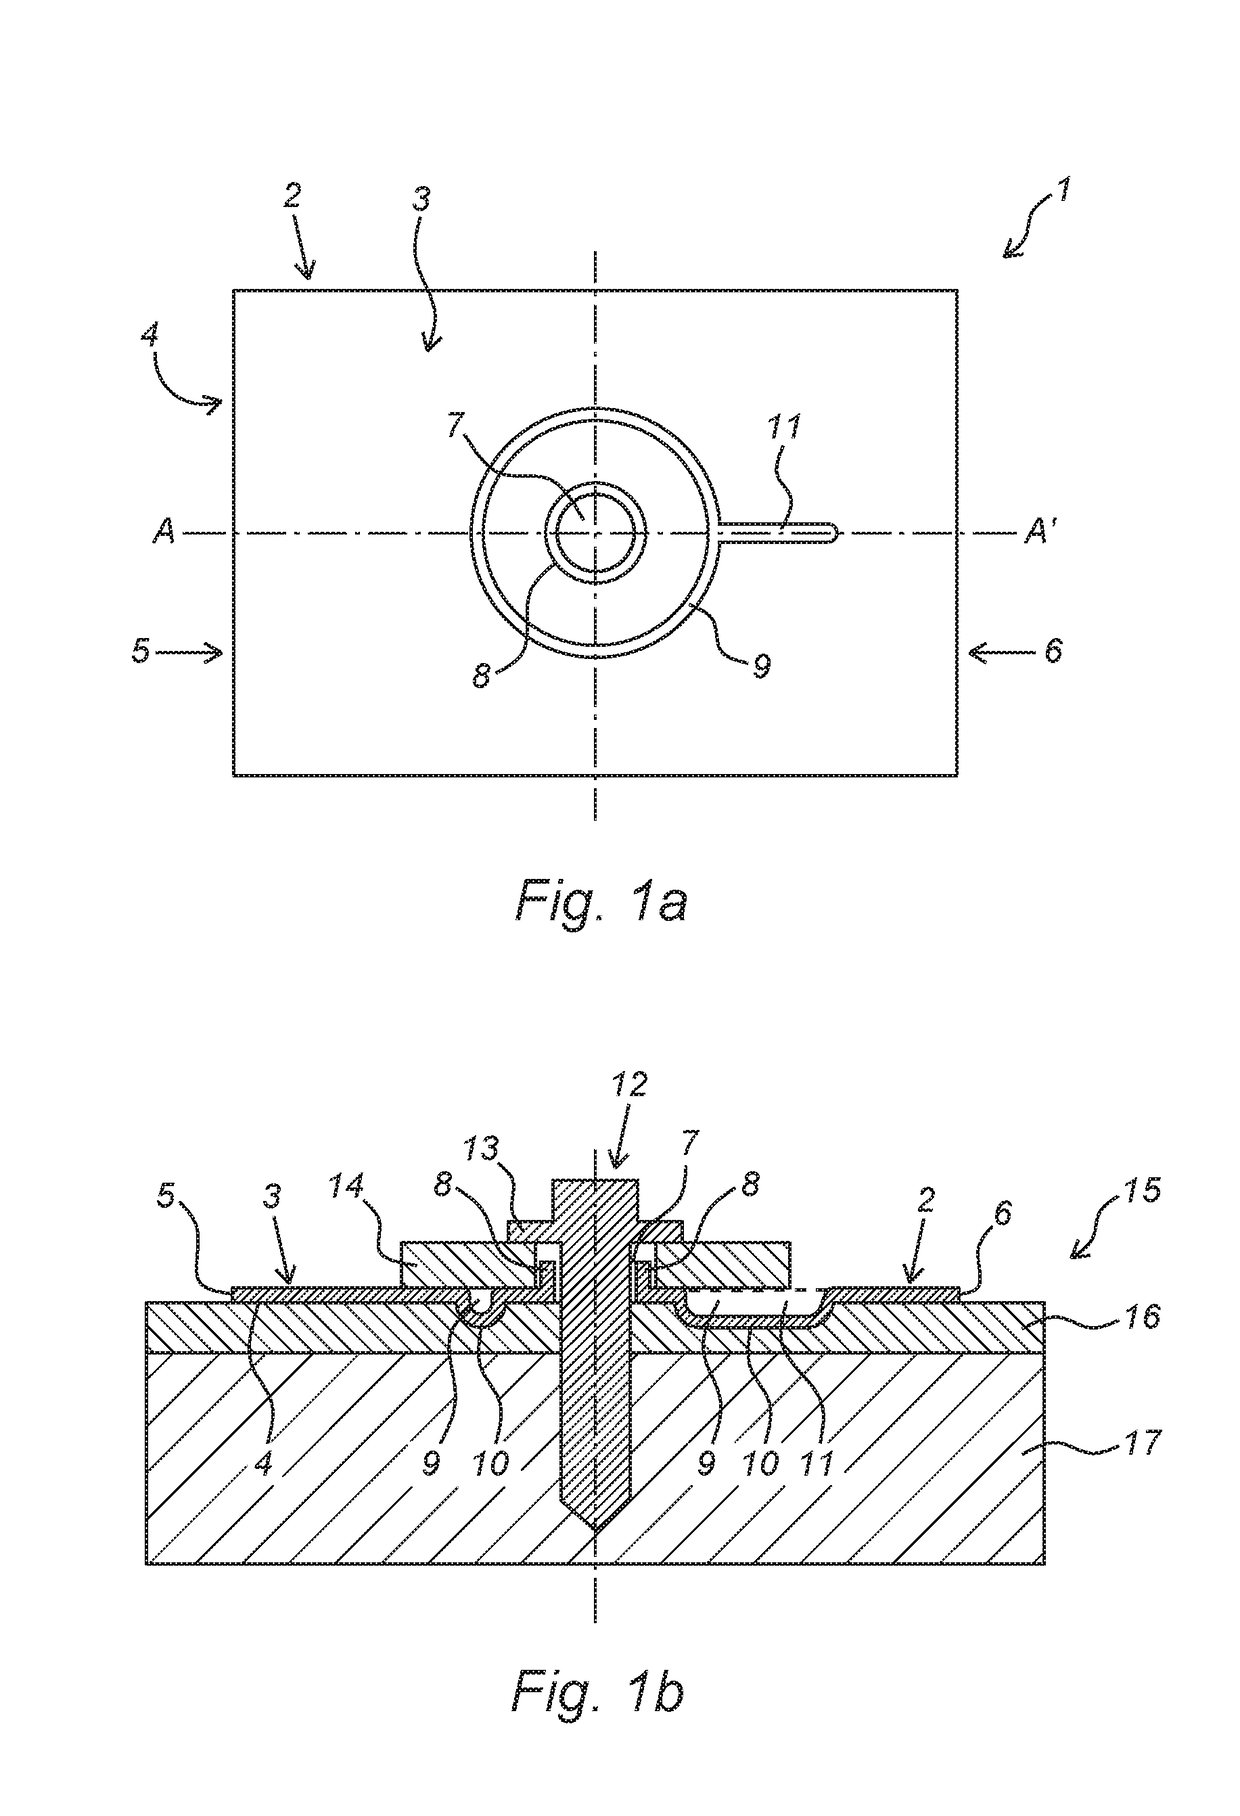 Fastening Structure and Method for Fitting a Coupling Profile to a Pitched Roof Covered with Shingles